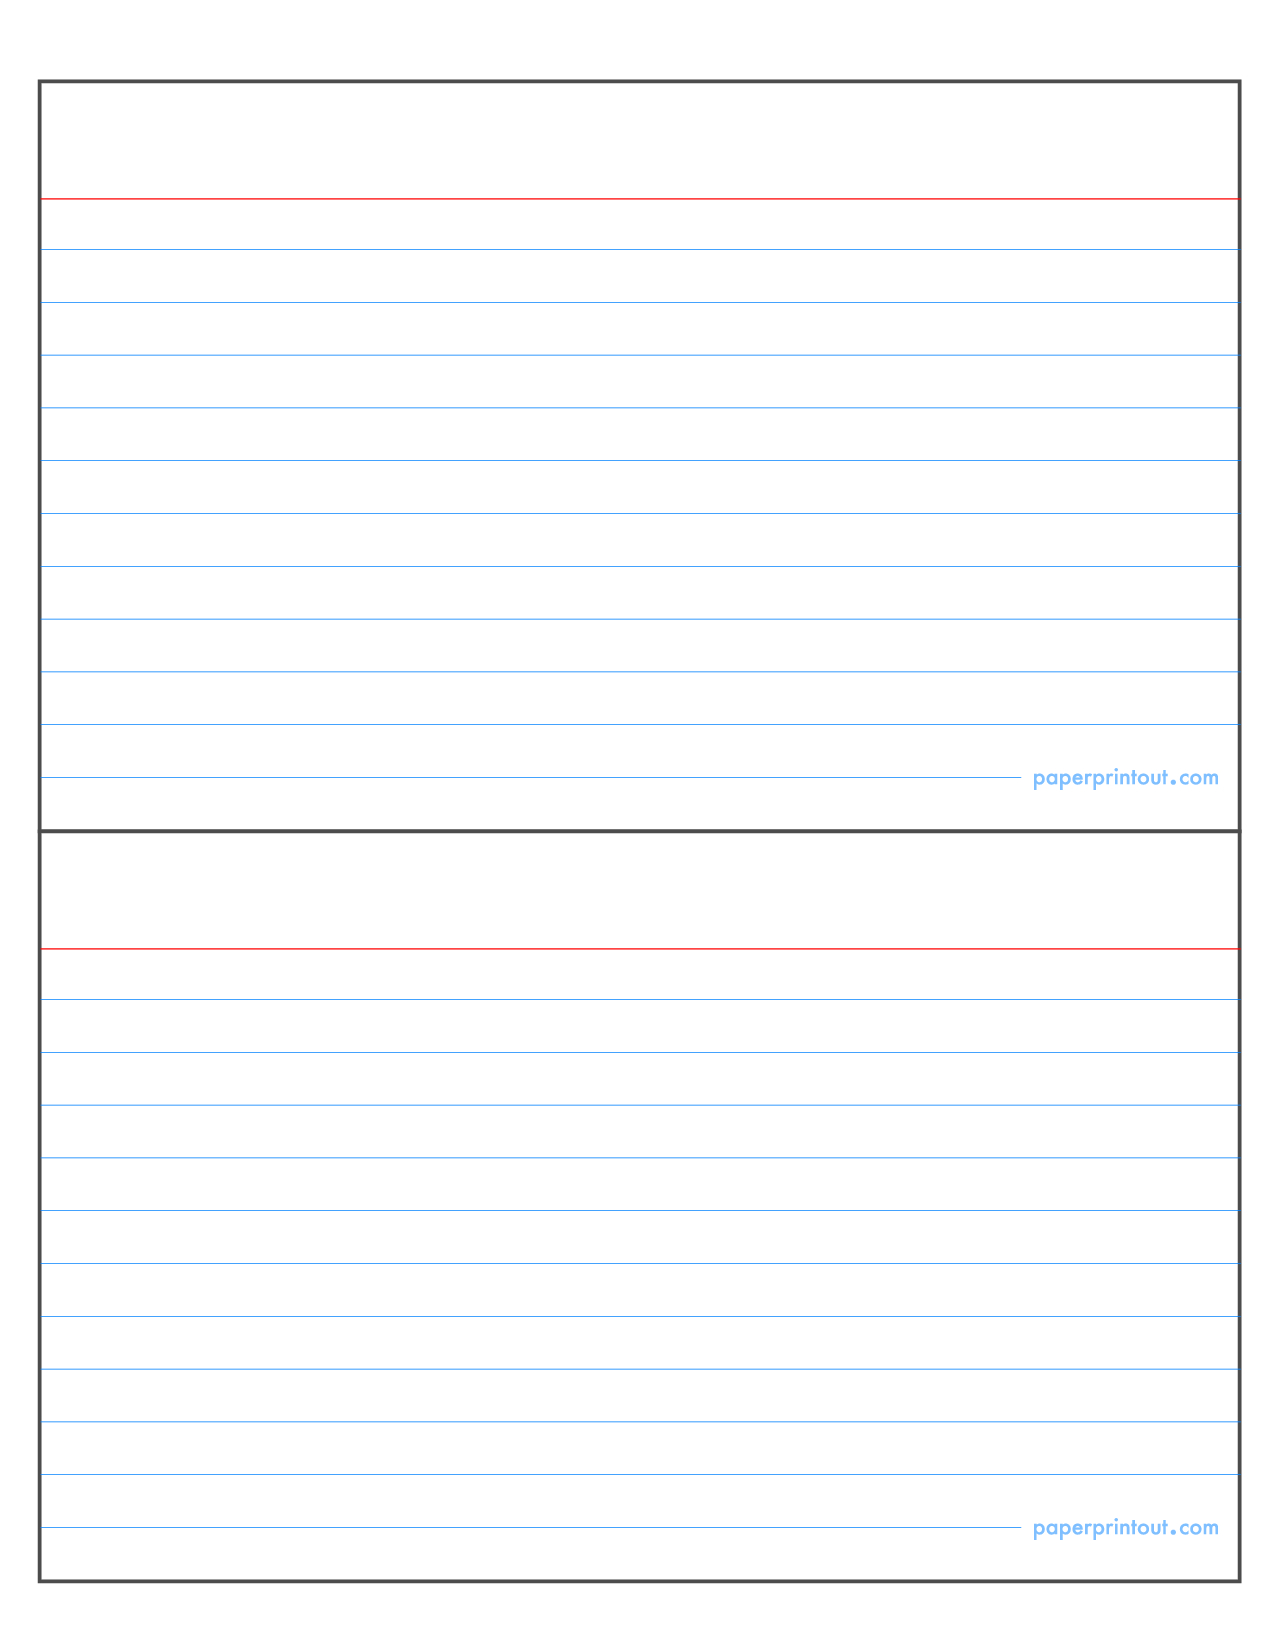 Index Card Template | E Commercewordpress Inside Index Card Template For Word